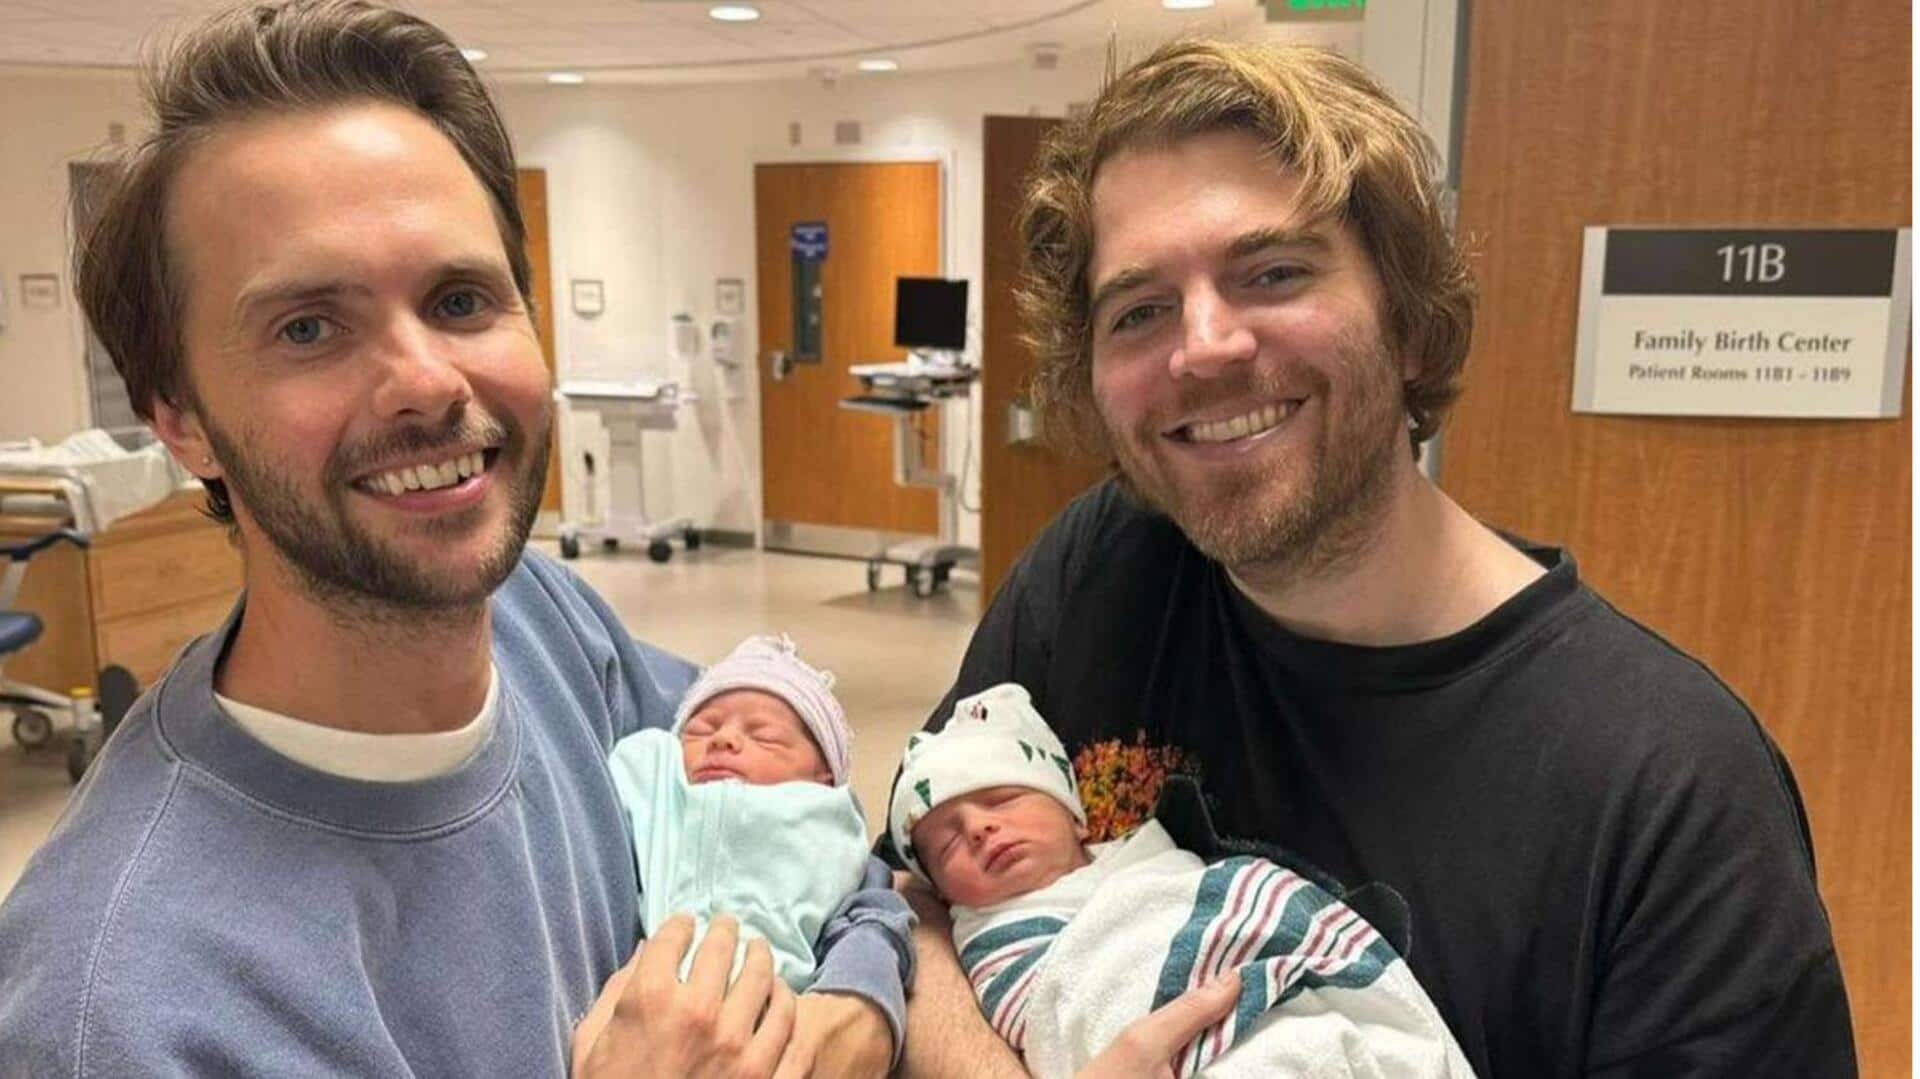 Shane Dawson's fatherhood announcement sparks backlash—who is the controversial YouTuber